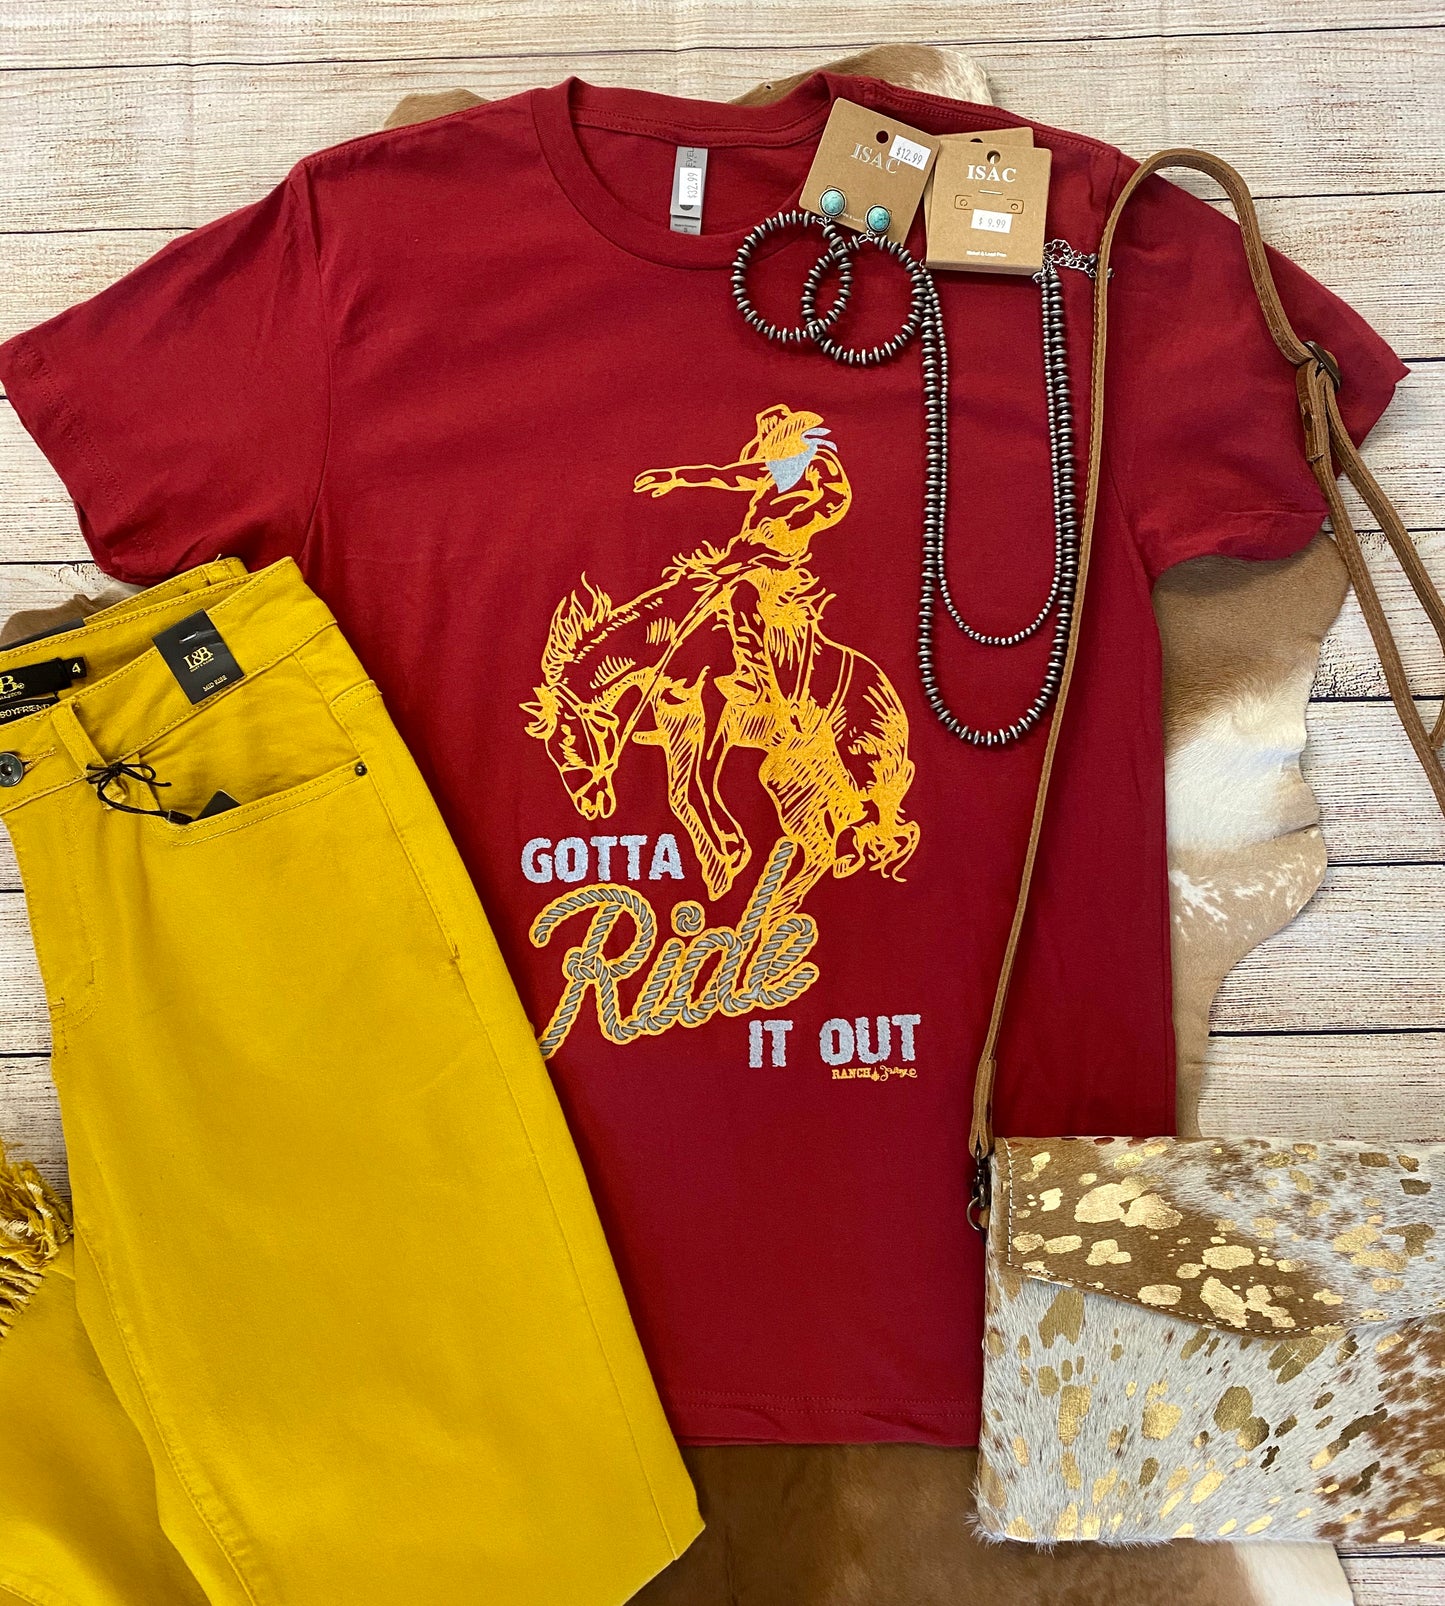 The Gotta Ride It Out Tee